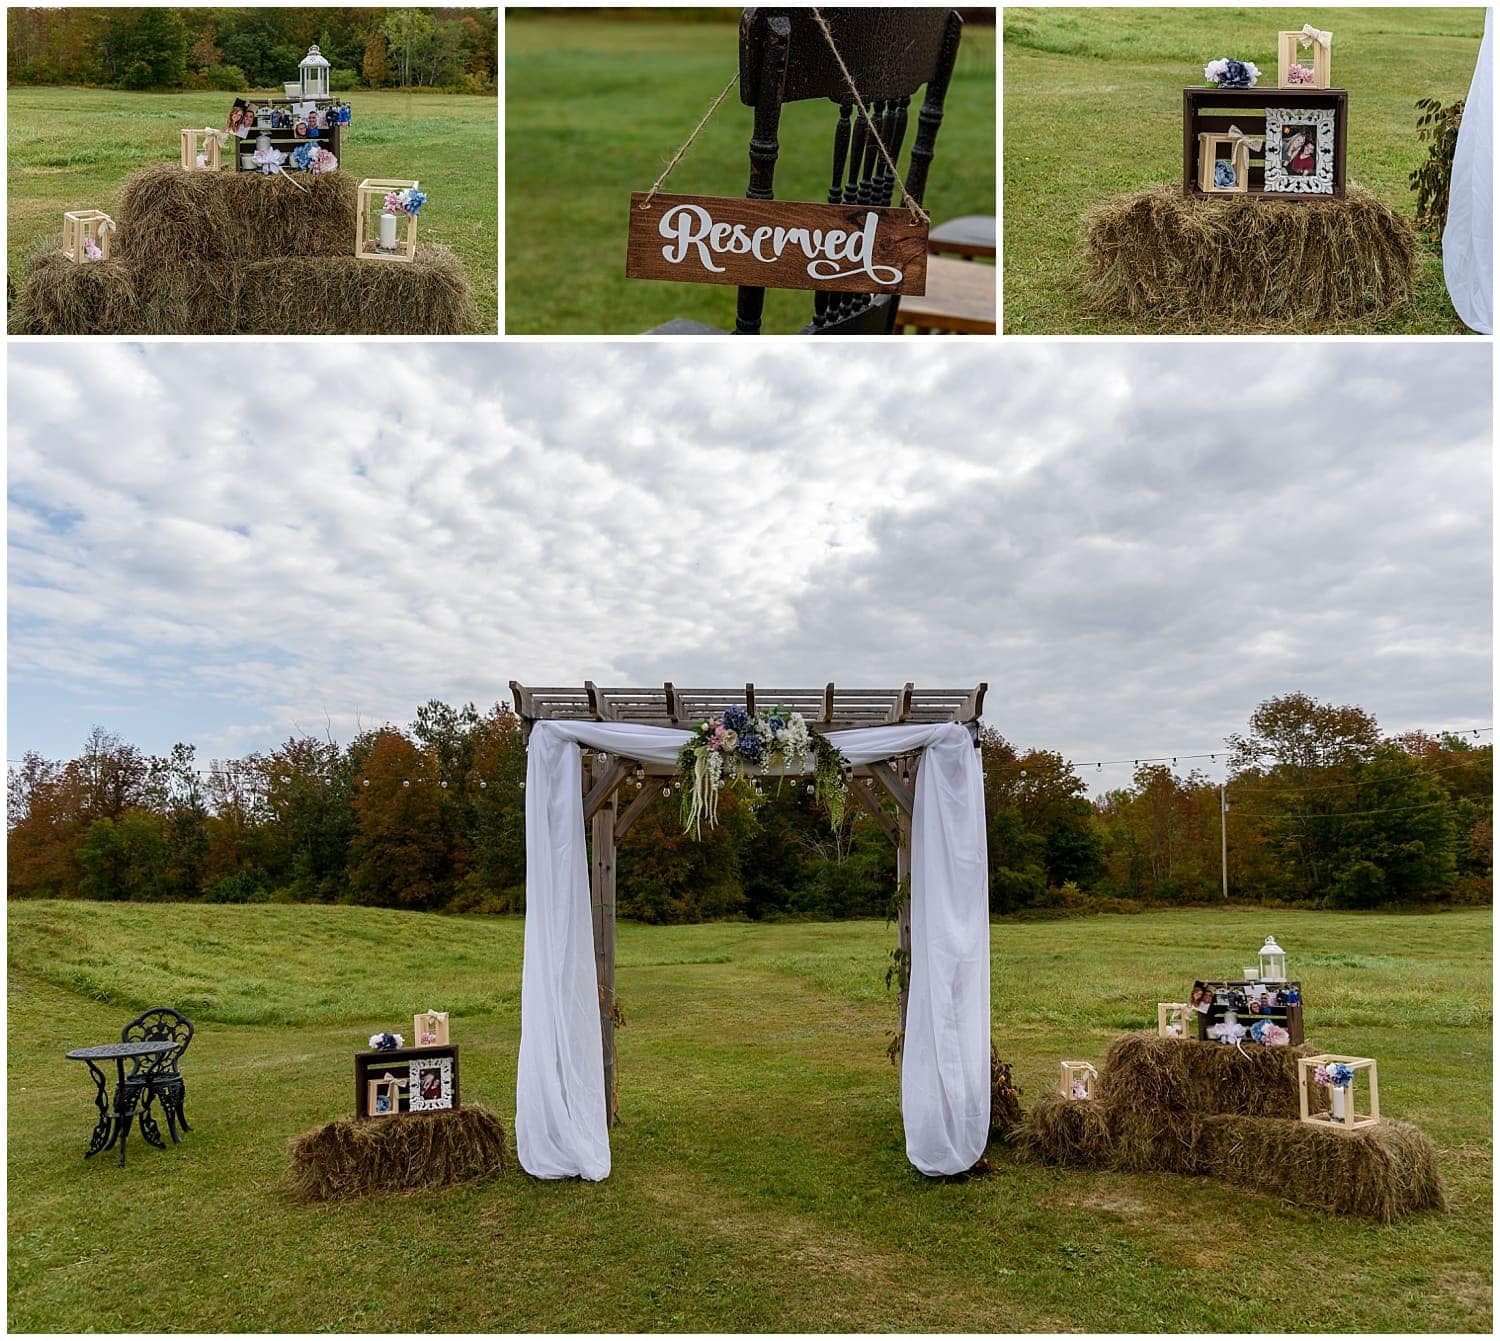 The wedding ceremony set up for a wedding day at the Barn at Sadie Belle Farm in Hantsport NS.